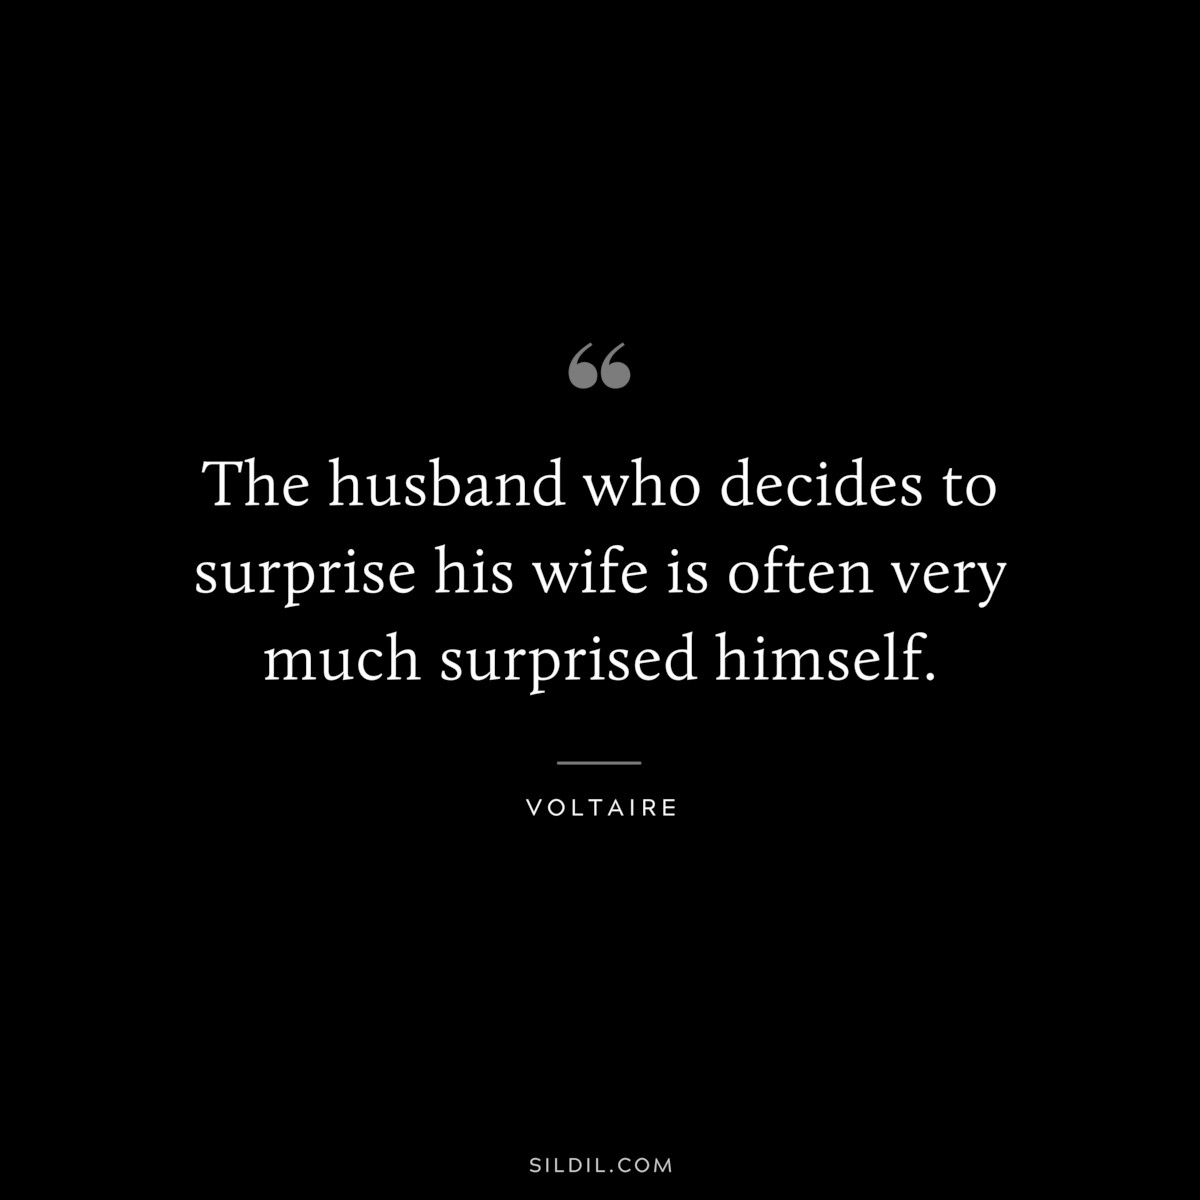 The husband who decides to surprise his wife is often very much surprised himself. ― Voltaire